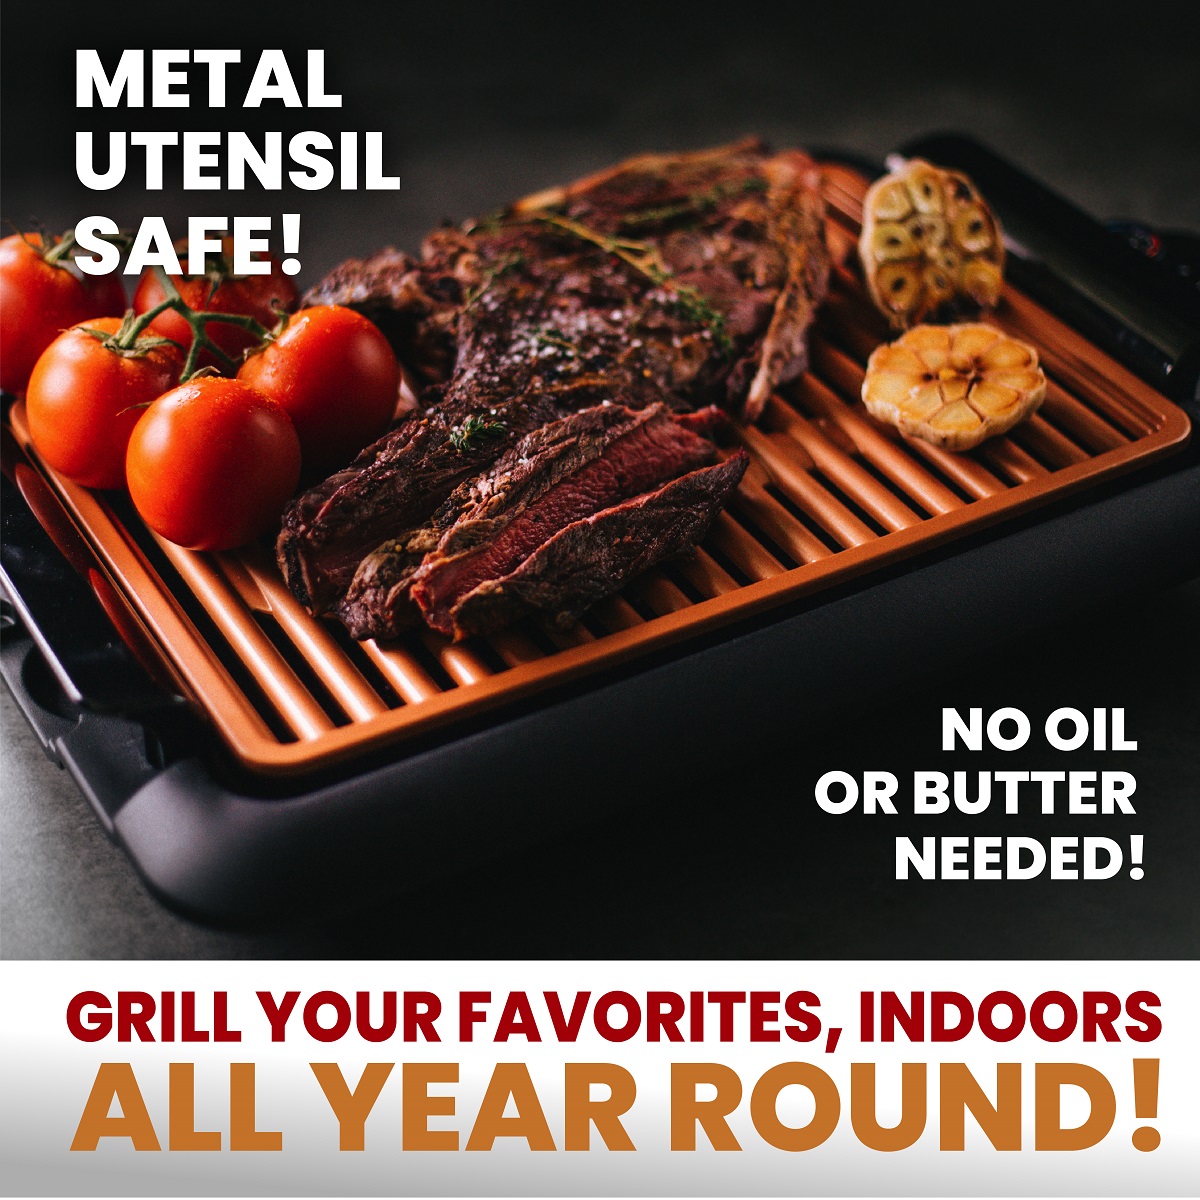 Gotham Steel Smokeless Indoor Grill, Ultra Nonstick Electric Grill, Dishwasher Safe Surface, Temp Control, Metal Utensil Safe, Barbeque Indoors with No Smoke! - image 3 of 7